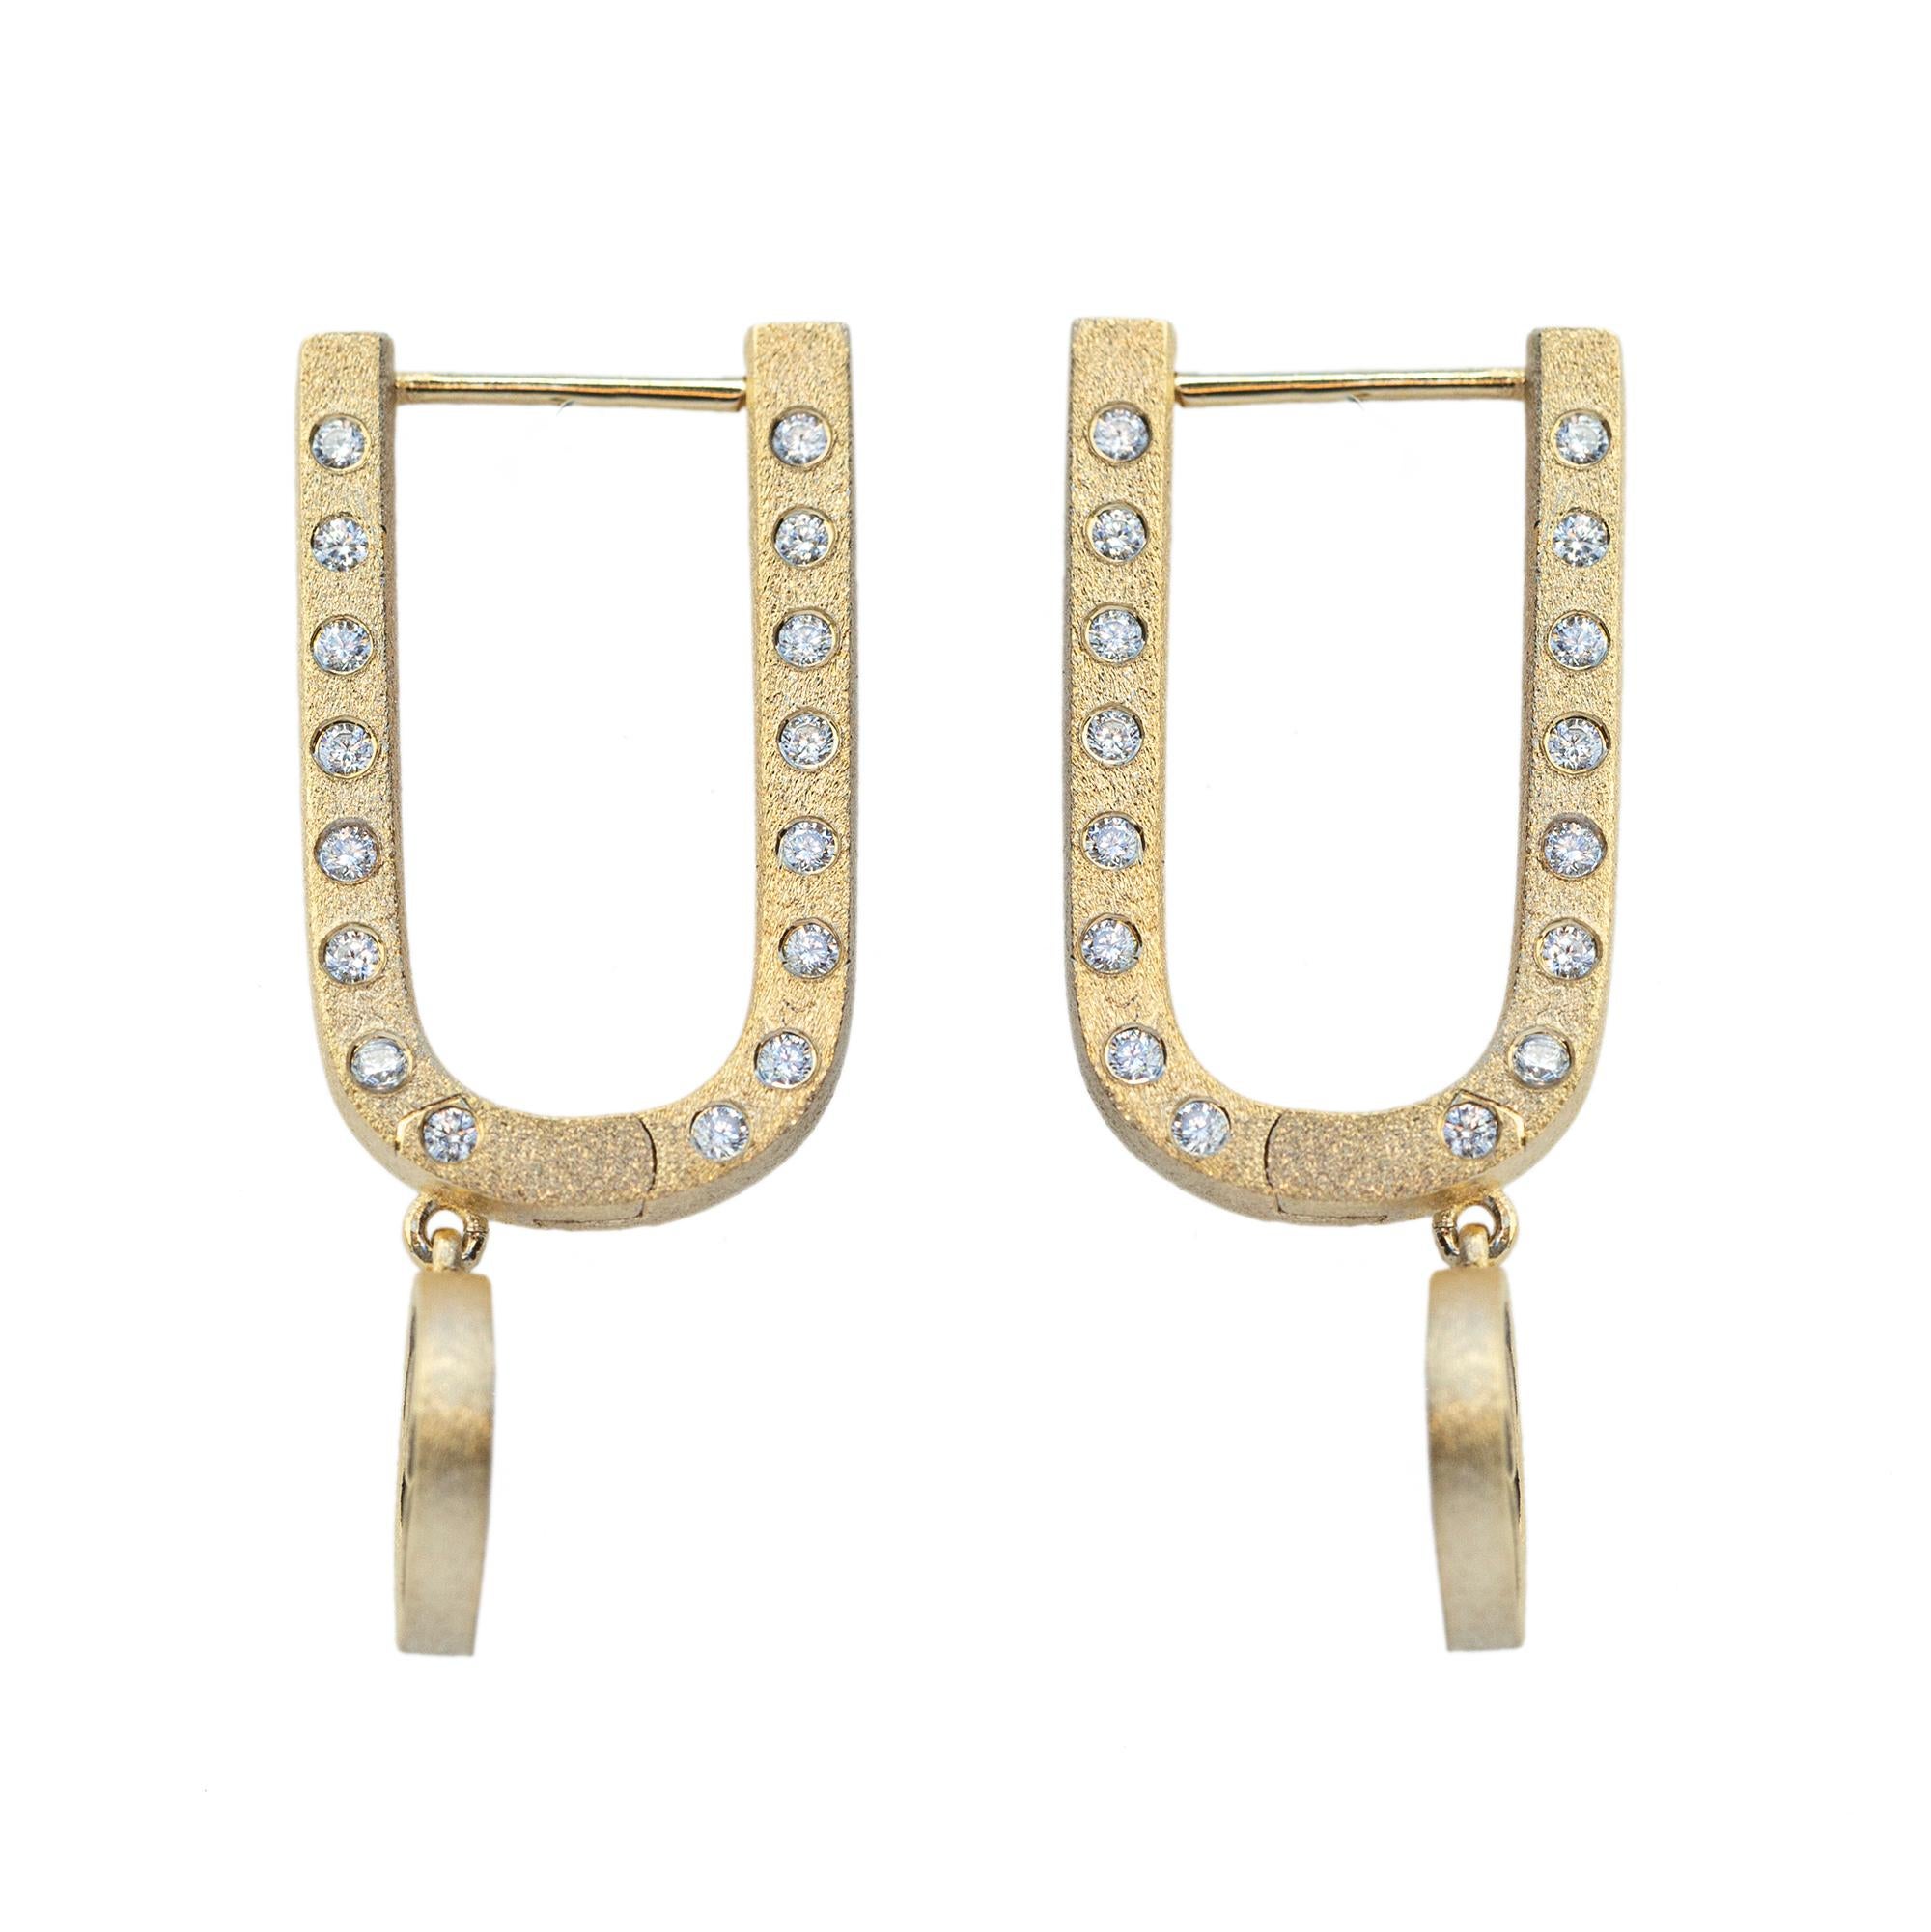 Queen Tiy Hoop earrings are part of our Malikat = Queens' Collection. It's inspired by the powerful legacy of the influential queens of ancient Egypt. Named after Queen Tiy; the ancient Egyptian queen who was the favored wife of king Amenhoteb III